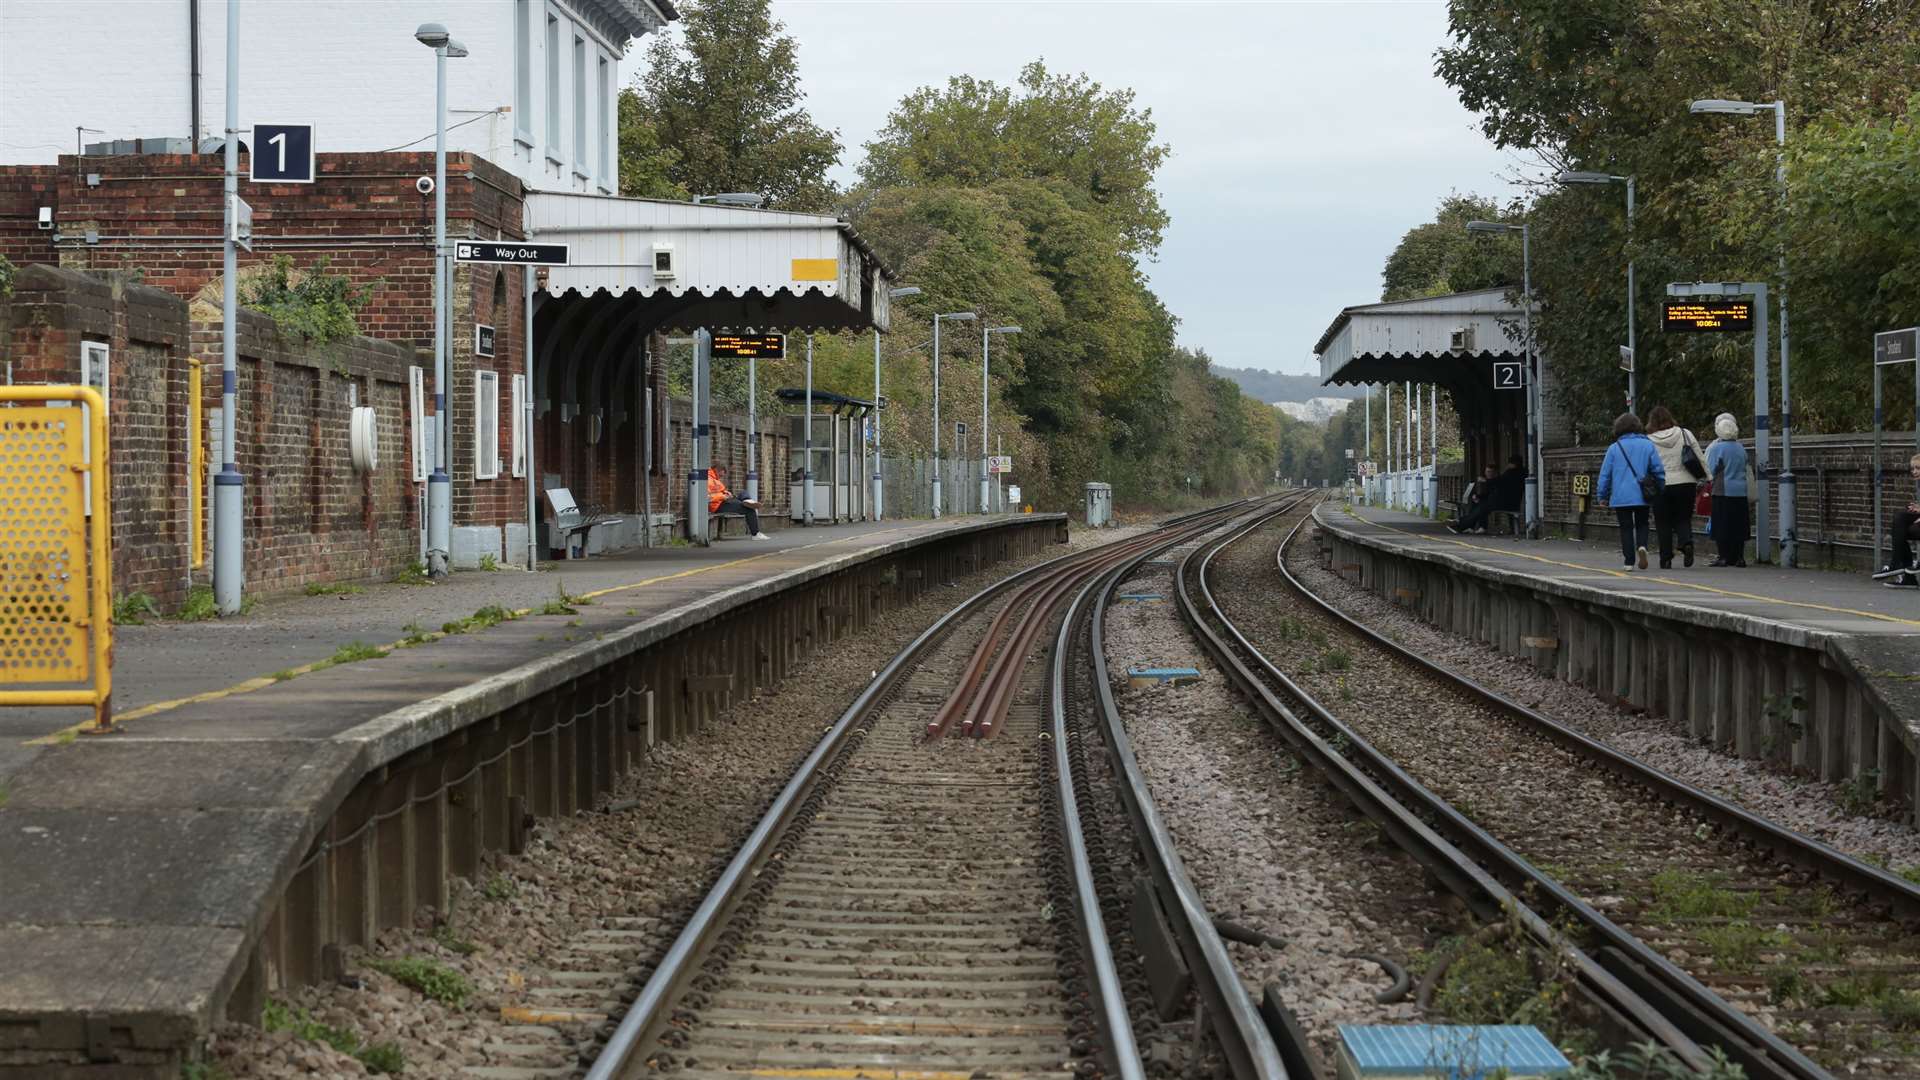 The operation took place at Snodland station